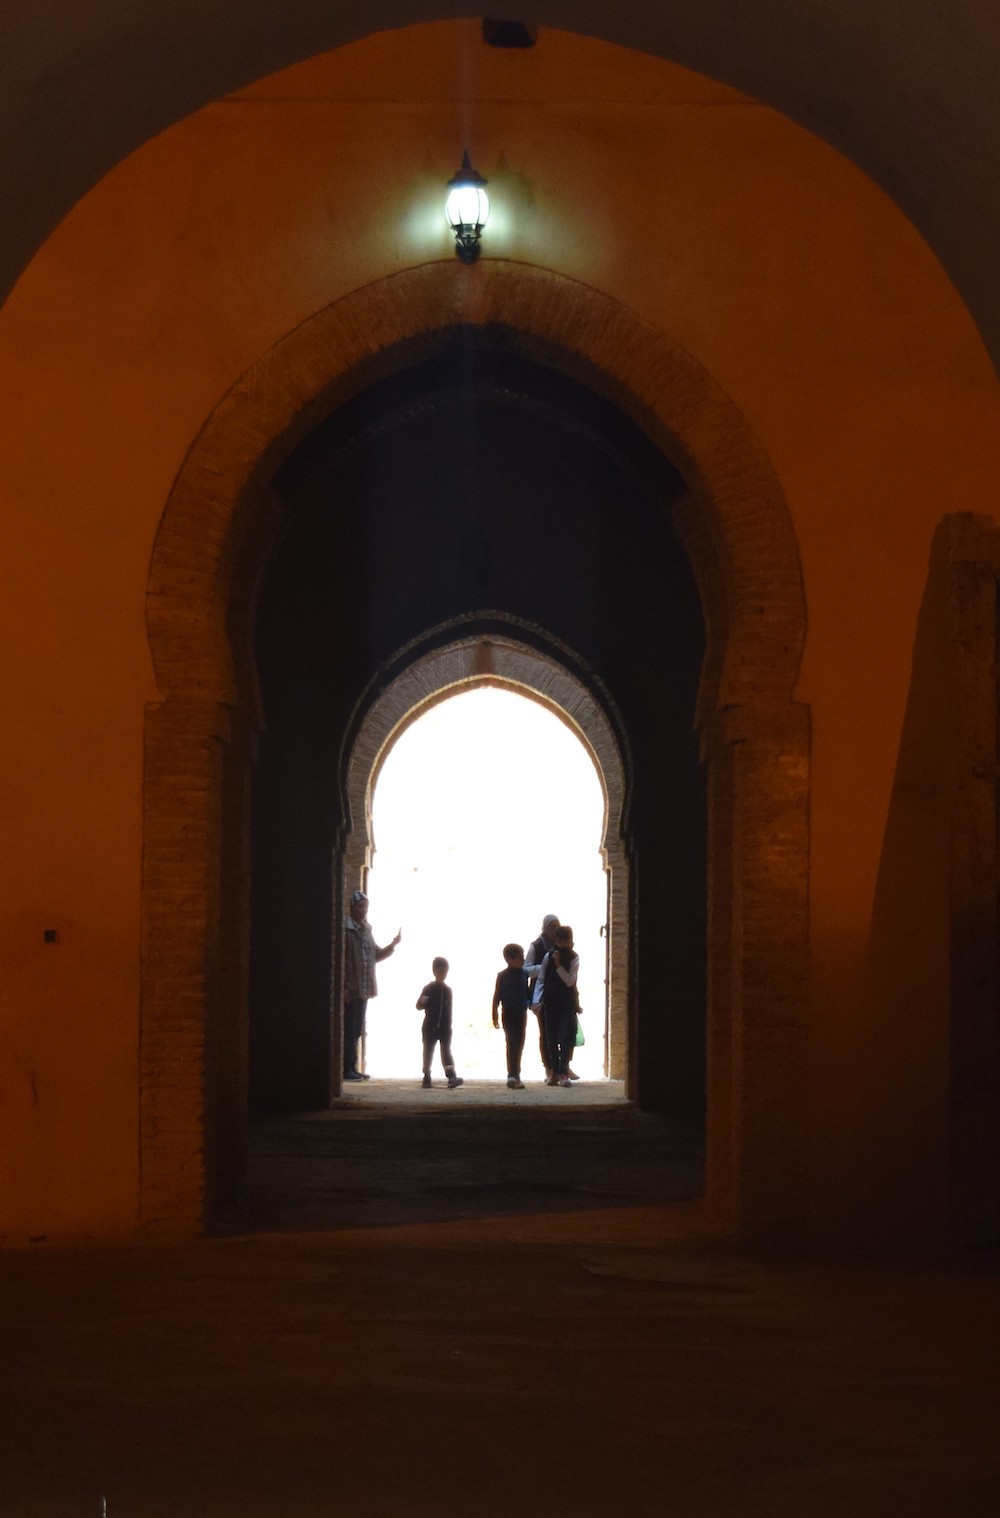 an arched doorway in Morocco with children's silhouettes lit up at the end of the hallway